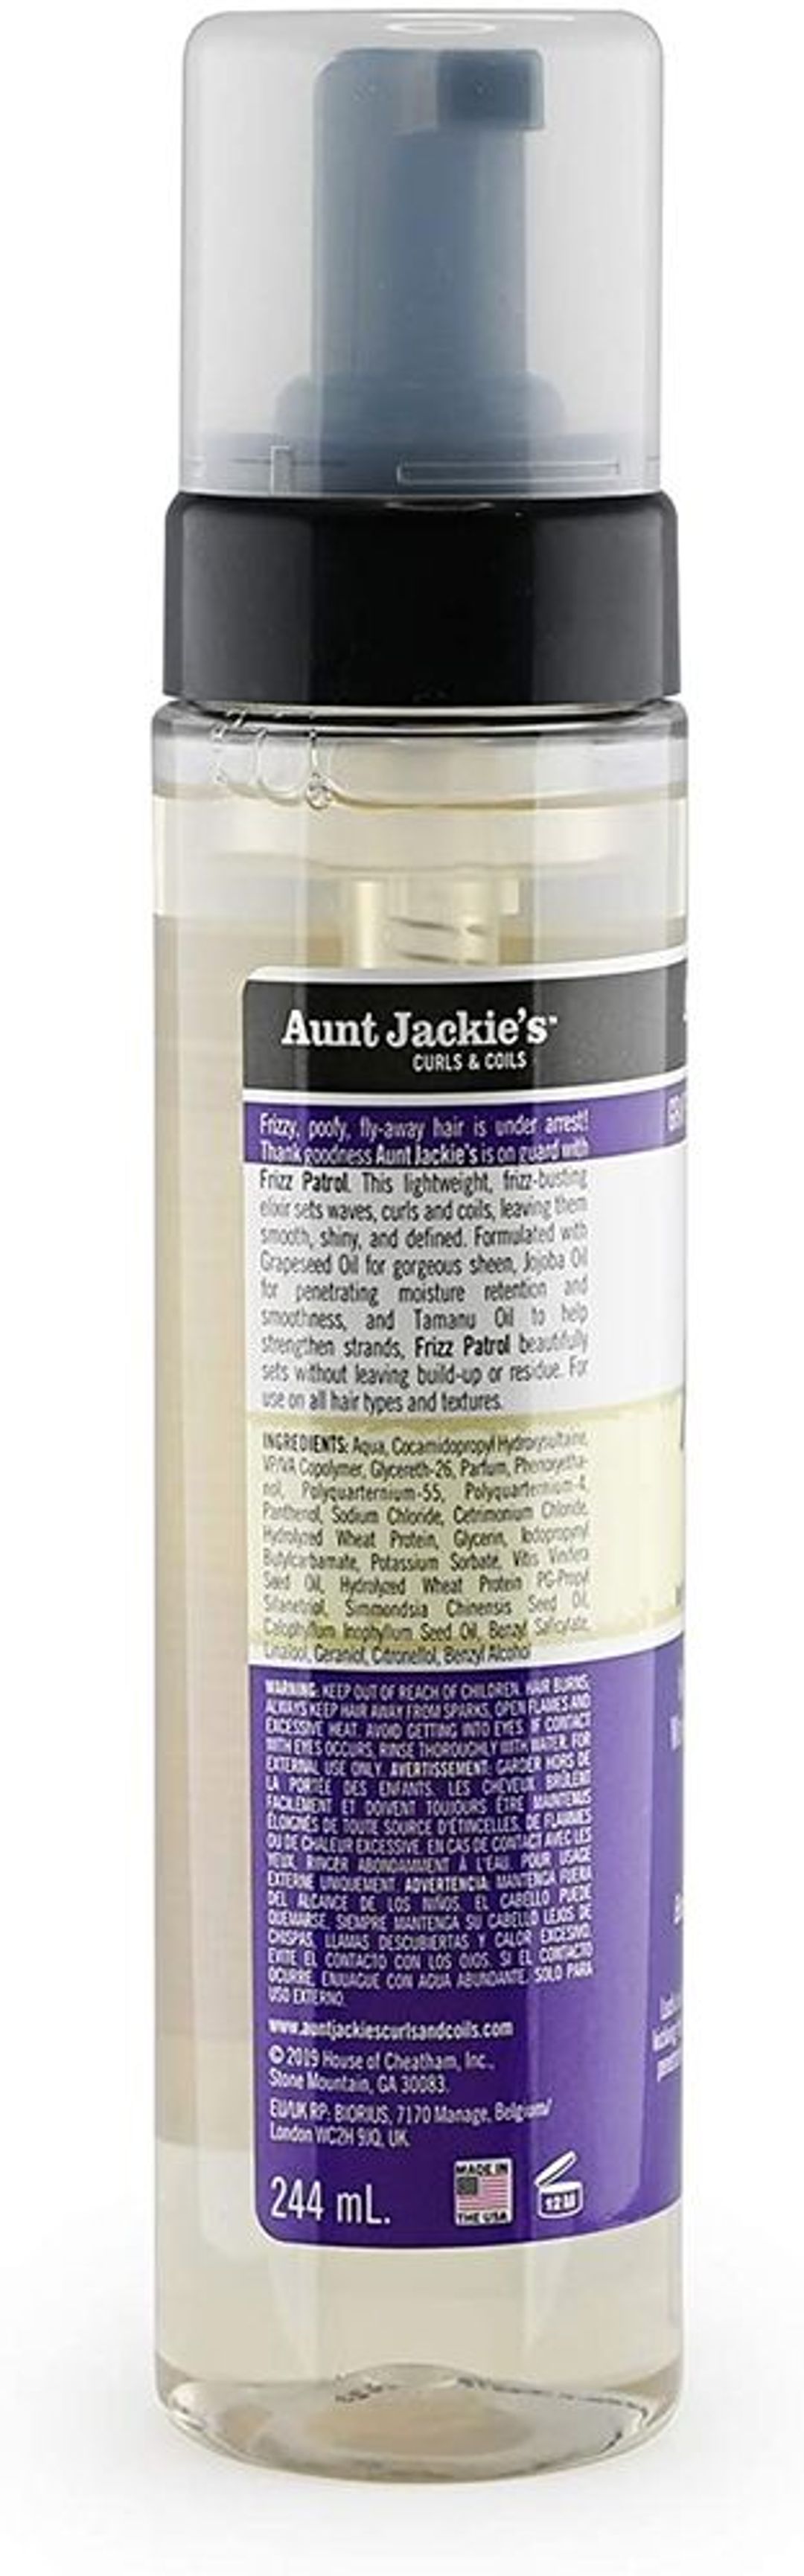 Aunt Jackie's Grapeseed Frizz Patrol Setting Mousse - 8oz